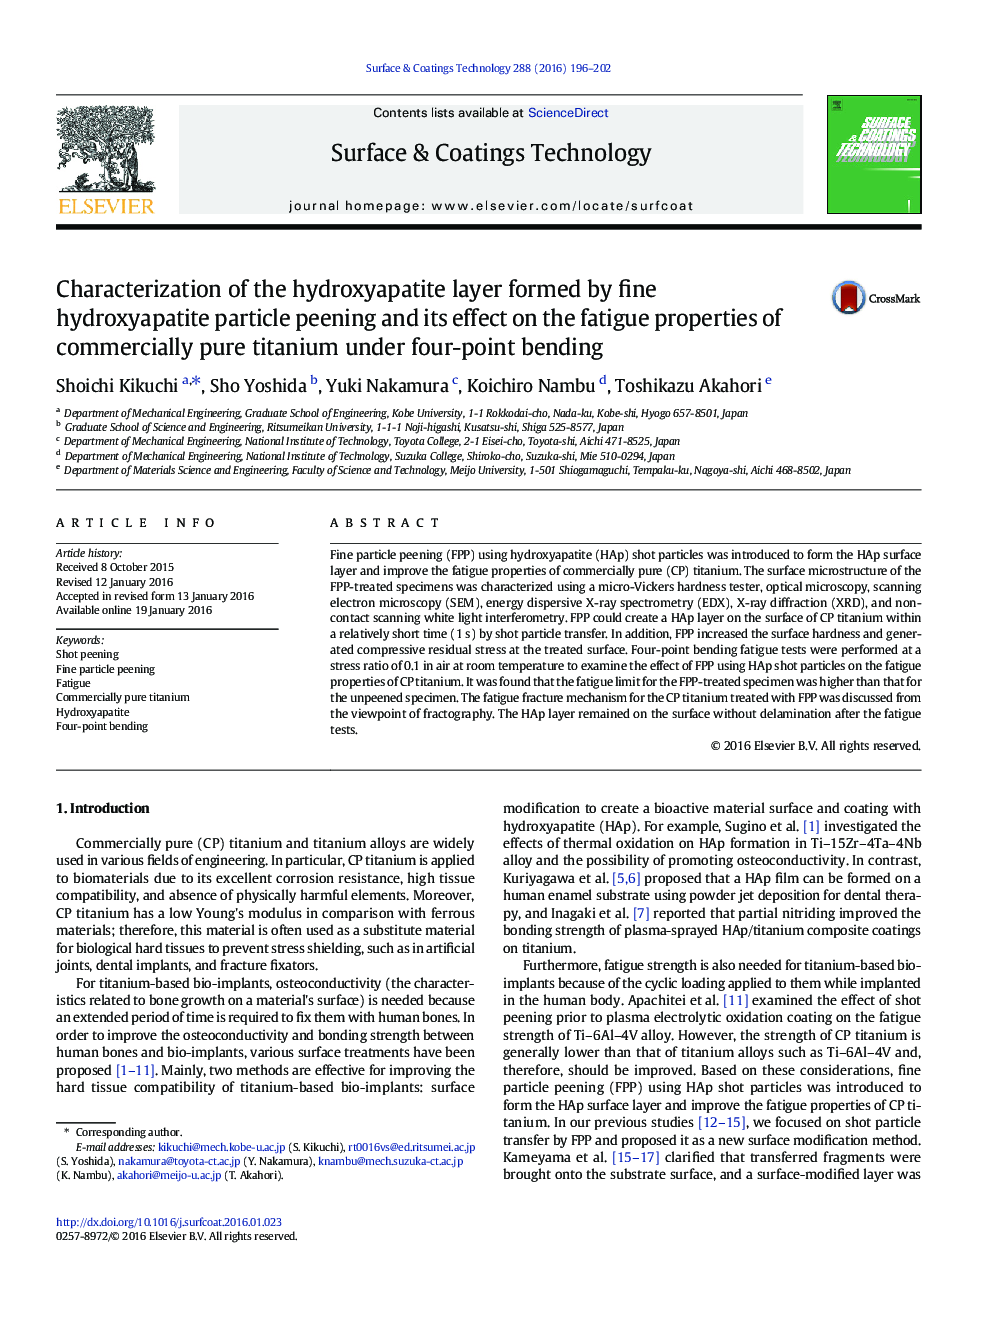 Characterization of the hydroxyapatite layer formed by fine hydroxyapatite particle peening and its effect on the fatigue properties of commercially pure titanium under four-point bending